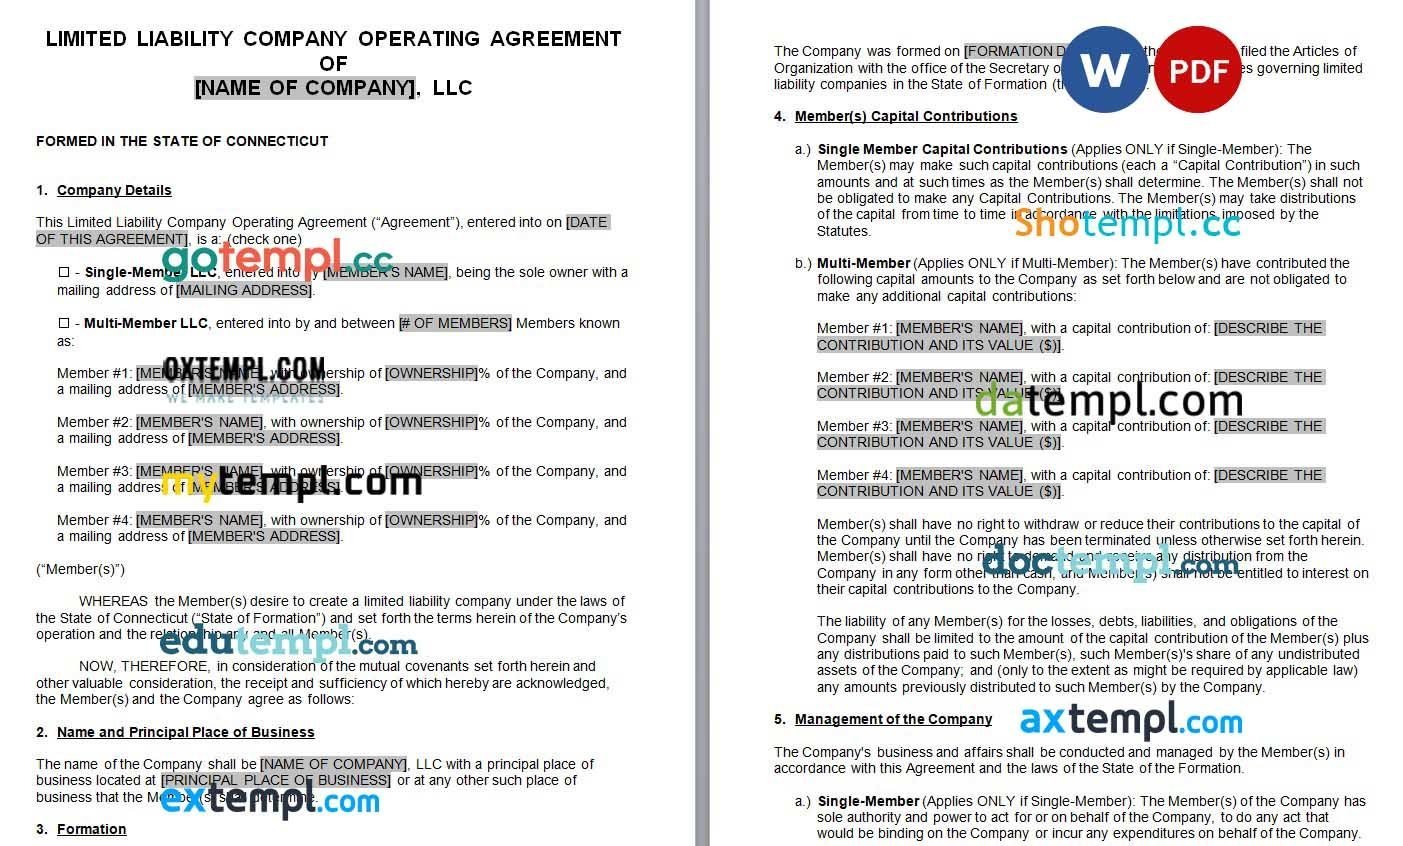 Connecticut LLC Operating Agreement word example, fully editable